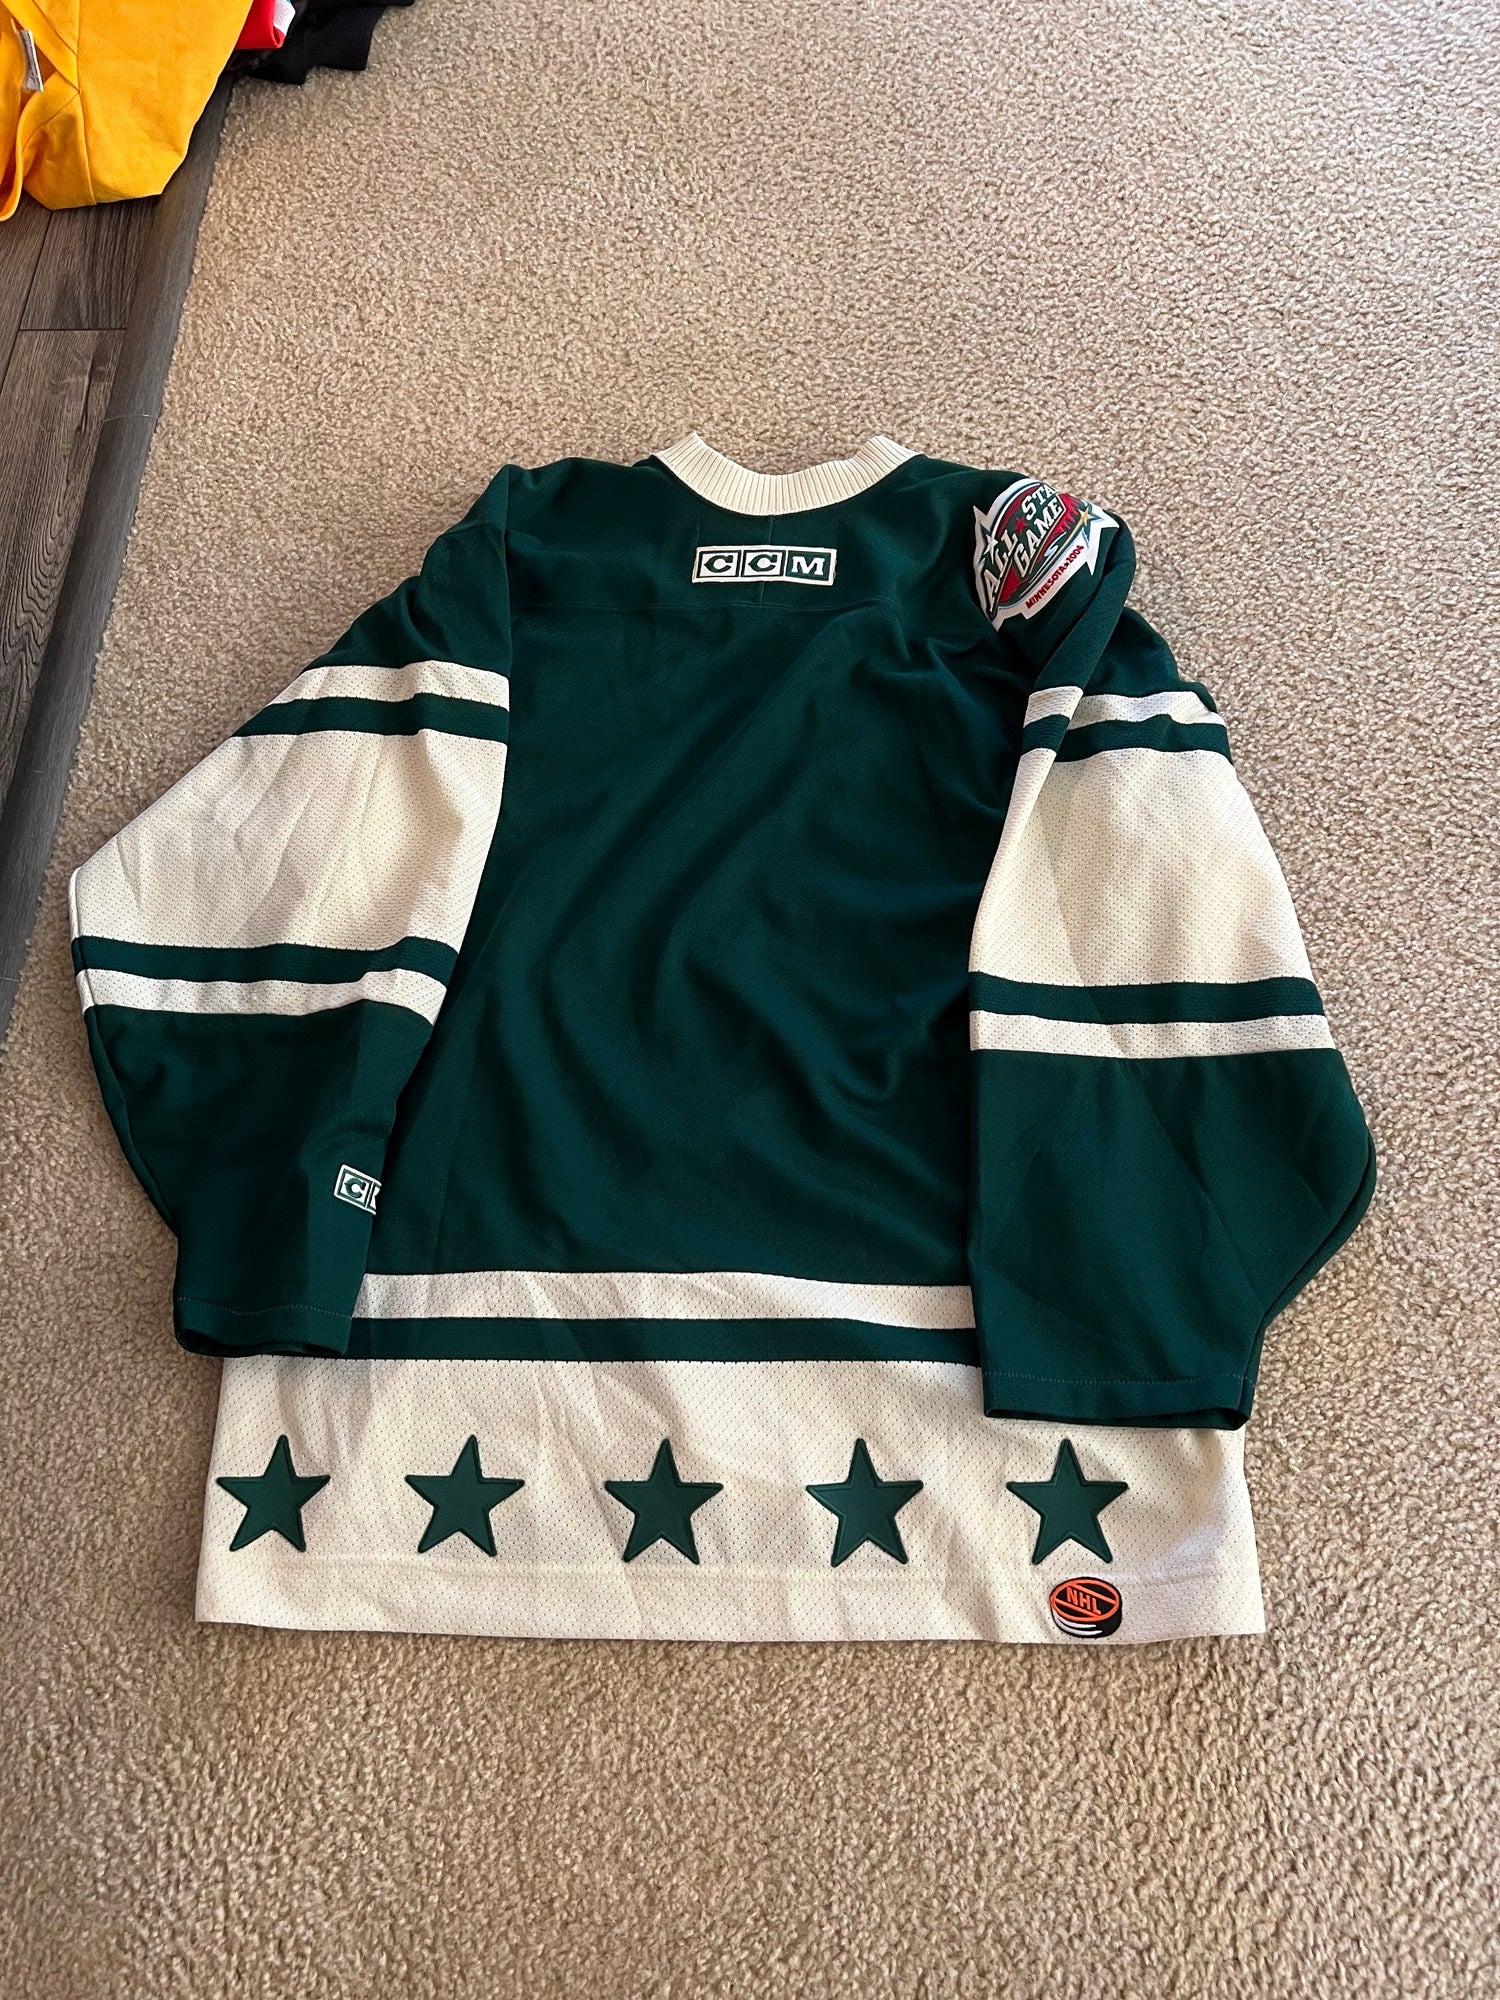 1996 NHL ALL-STAR WESTERN CONFERENCE CCM JERSEY M